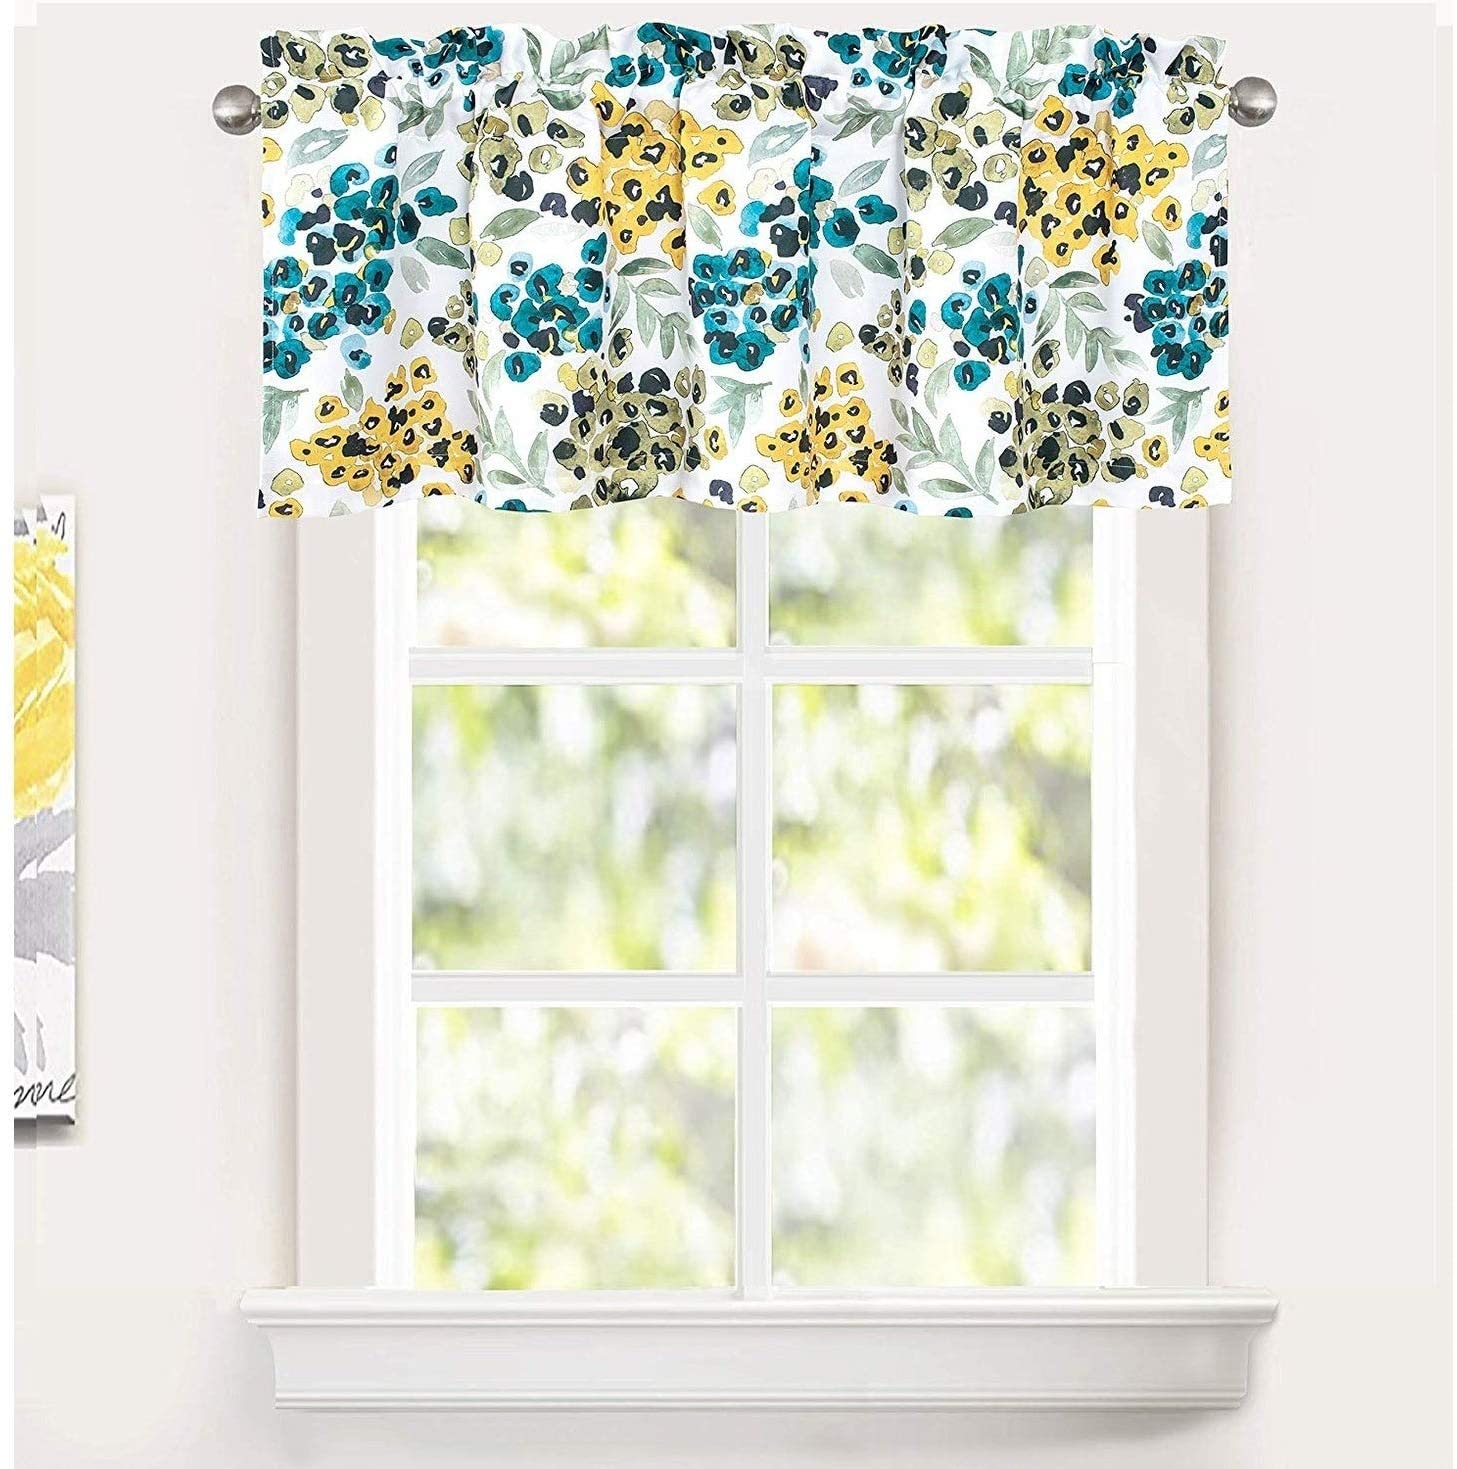 Watercolor Flower Leaves Botanical Pattern Window Valance 52'' Width X 18''Length Color Floral French Country 100% Polyester Lined